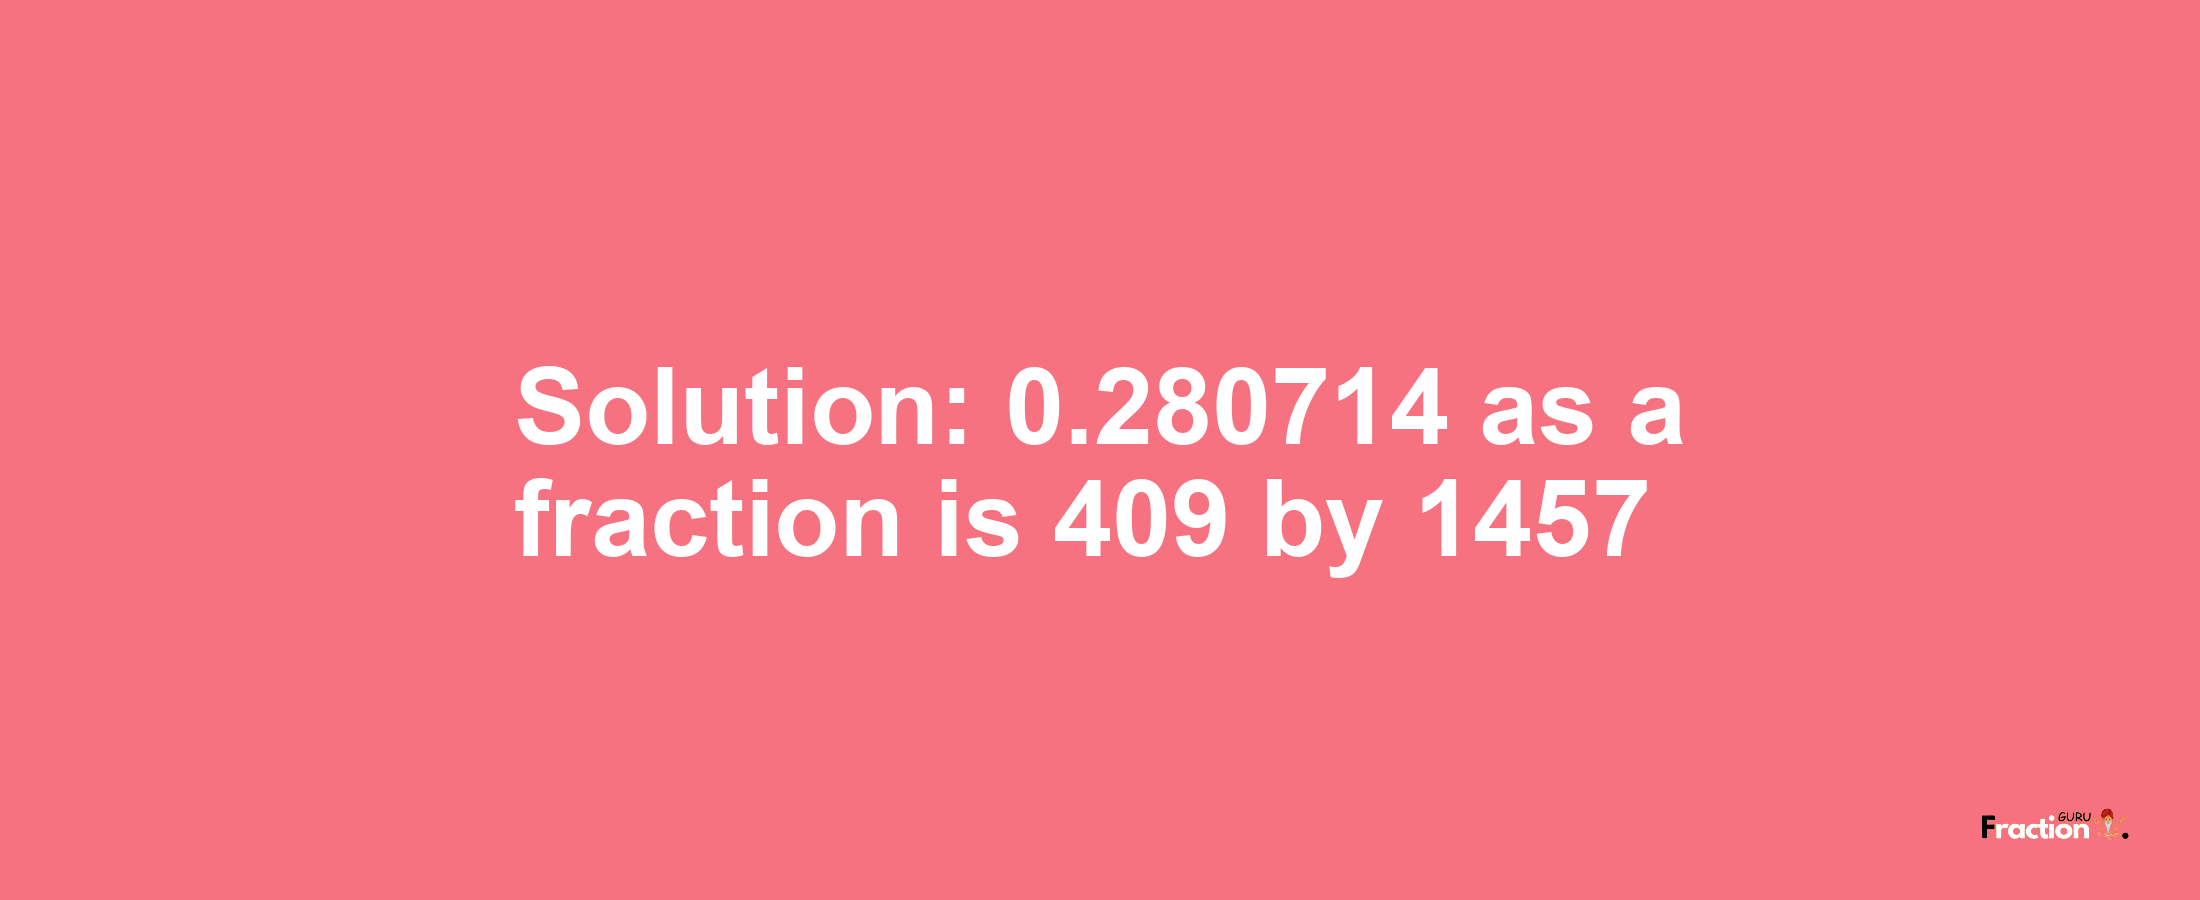 Solution:0.280714 as a fraction is 409/1457